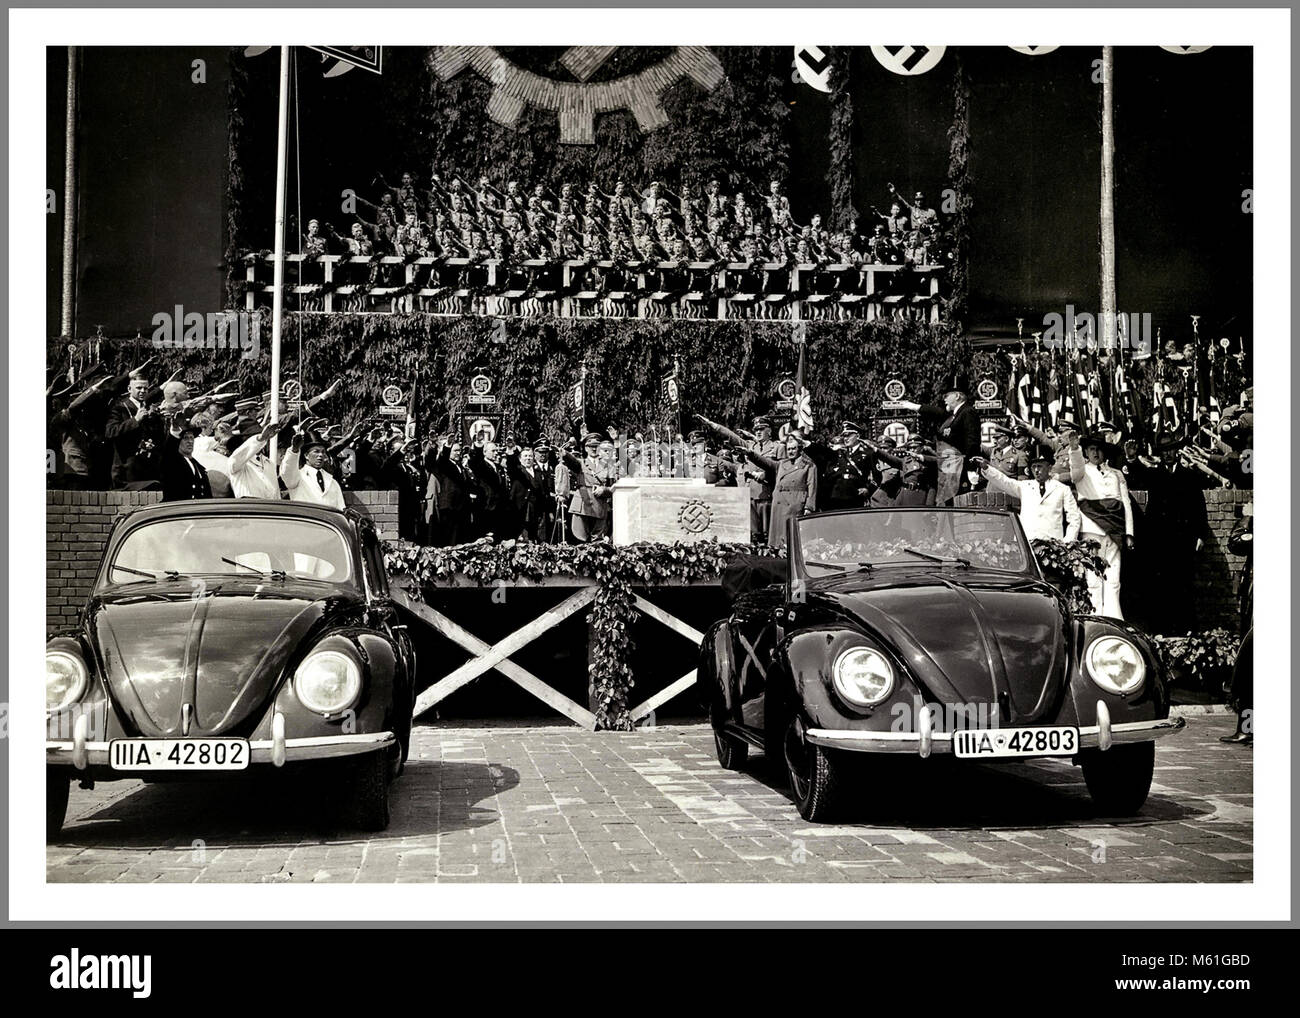 VOLKSWAGEN KdF -Wagen Germany propaganda launch image May 26th 1938 swastika emblem foundation stone laying ceremony with Adolf Hitler and Dr Porsche and officials saluting Heil Hitler at Fallersleben Wolfsburg Volkswagen factory with new KdF -Wagen (strength through joy) saloon and convertible cars on display under Nazi Swastika flags Stock Photo